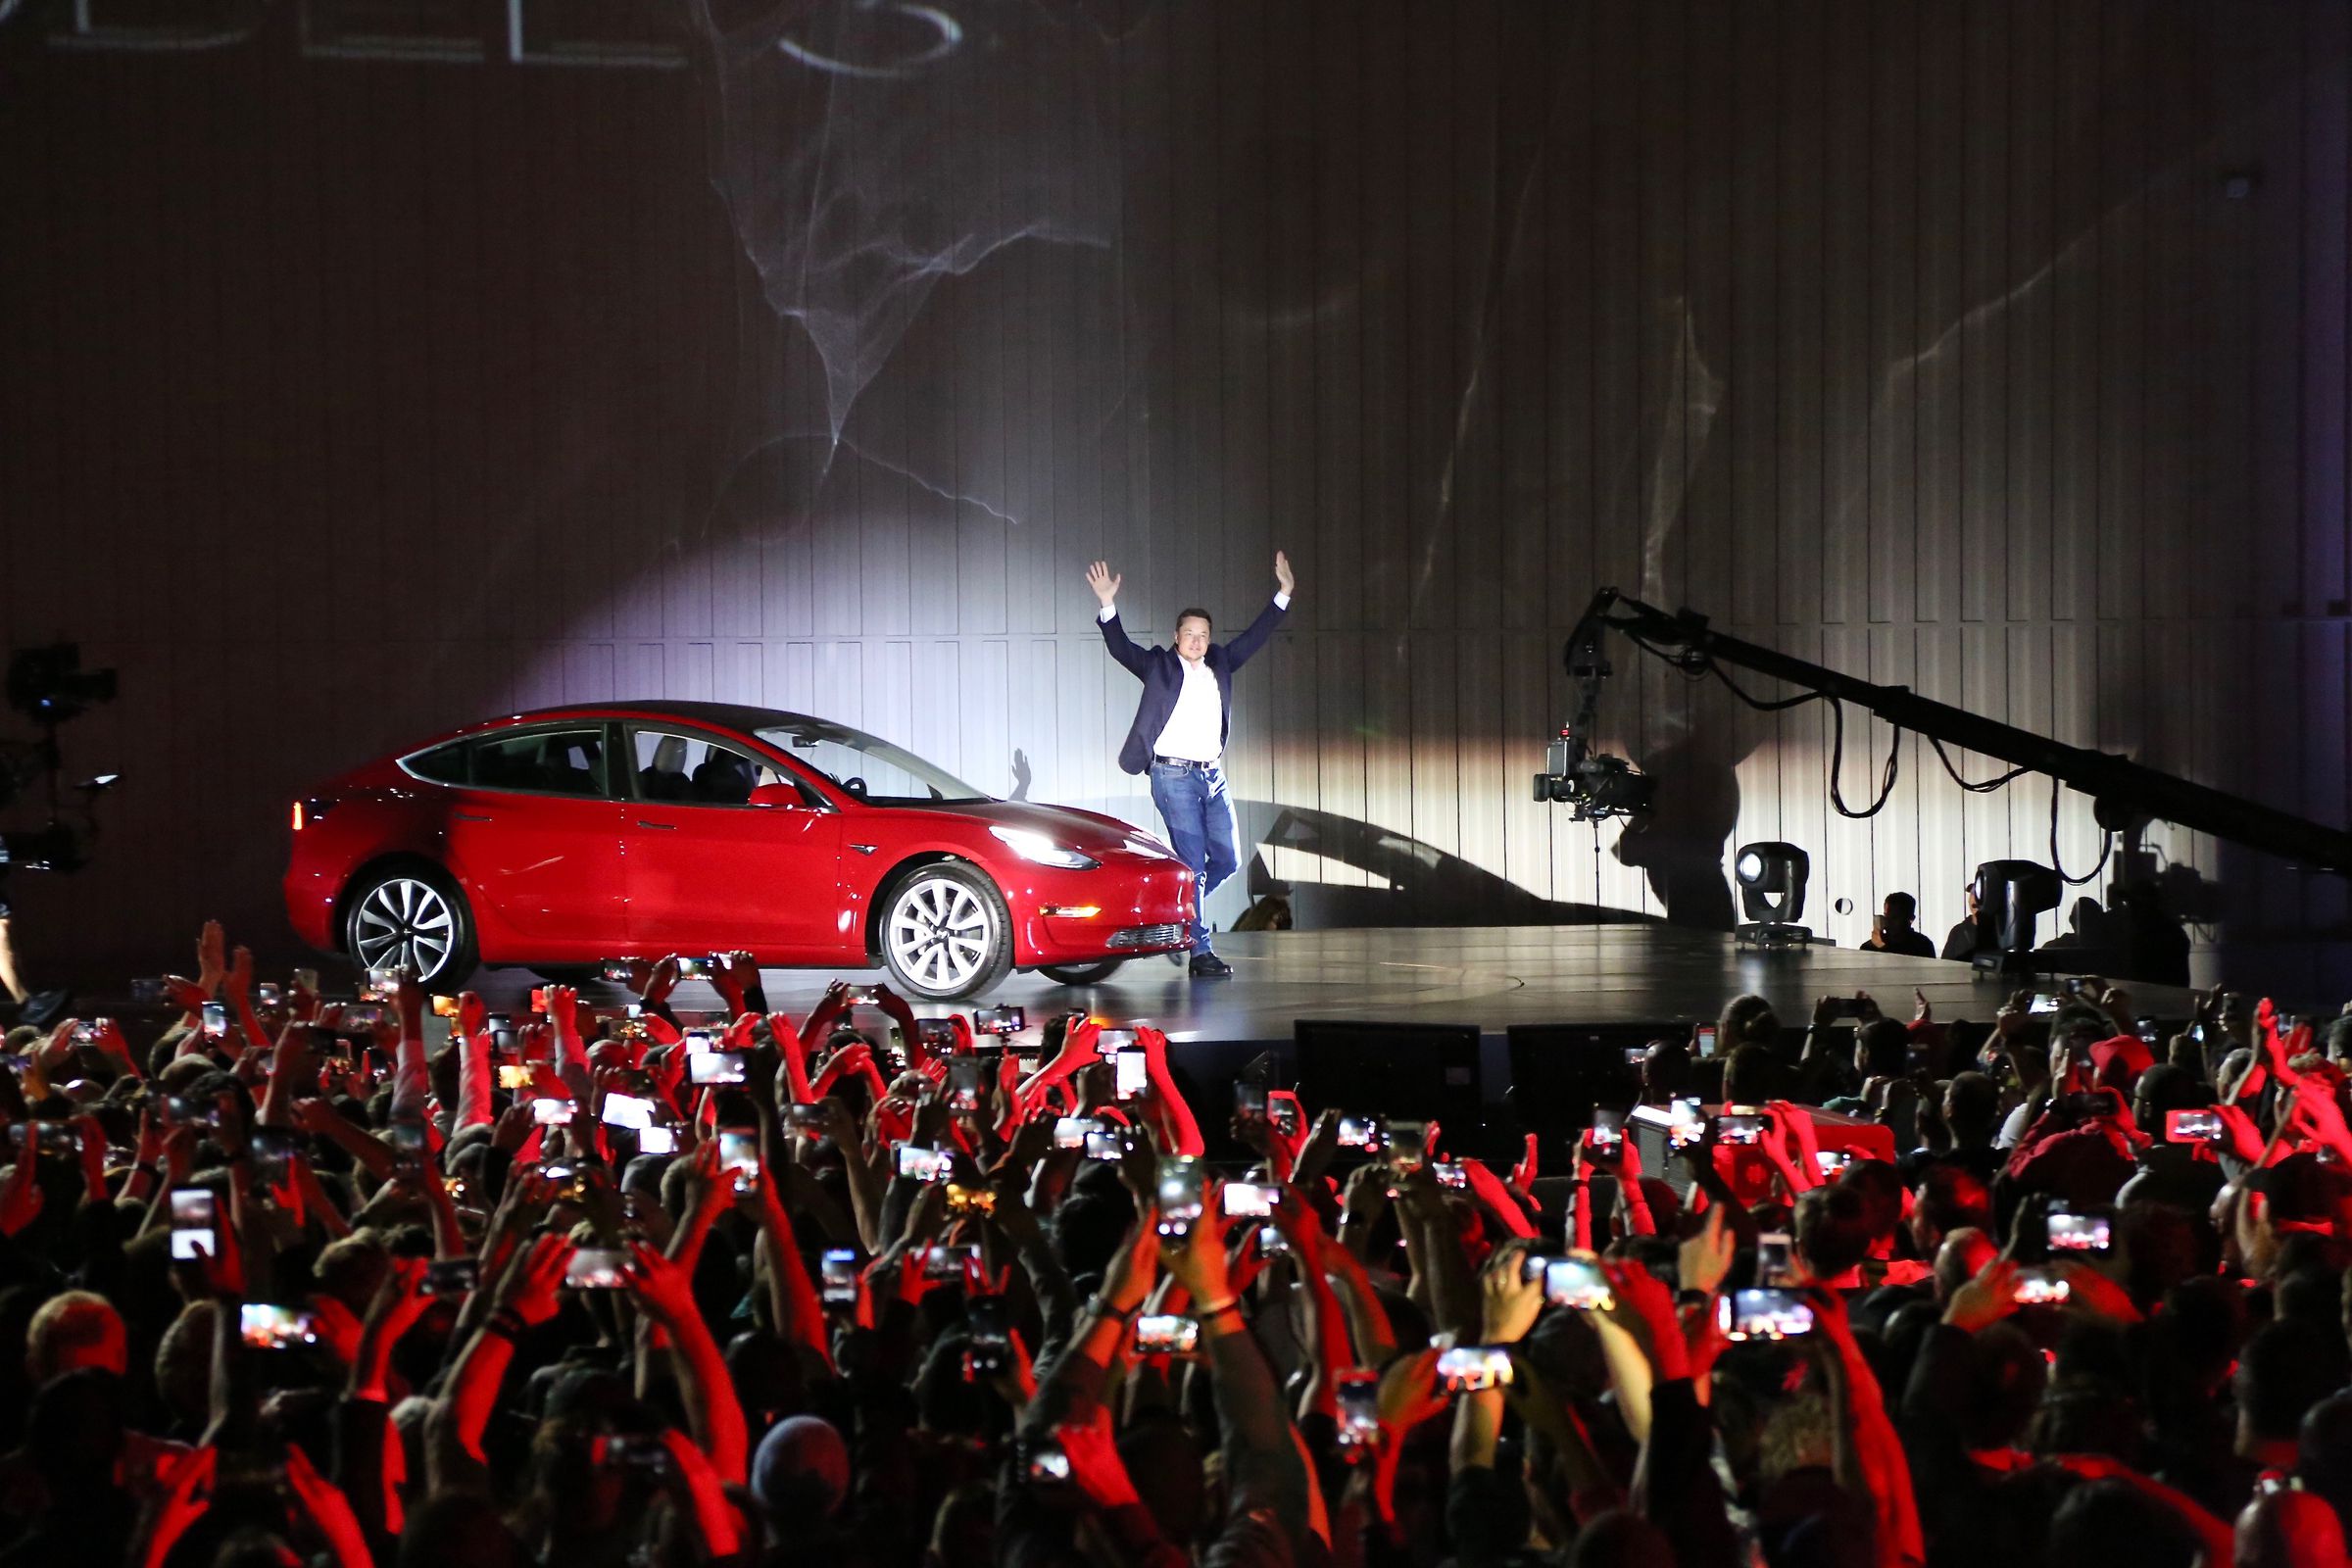 Elon Musk stands with his hands raised next to a red car on a stage in front of a crowd.